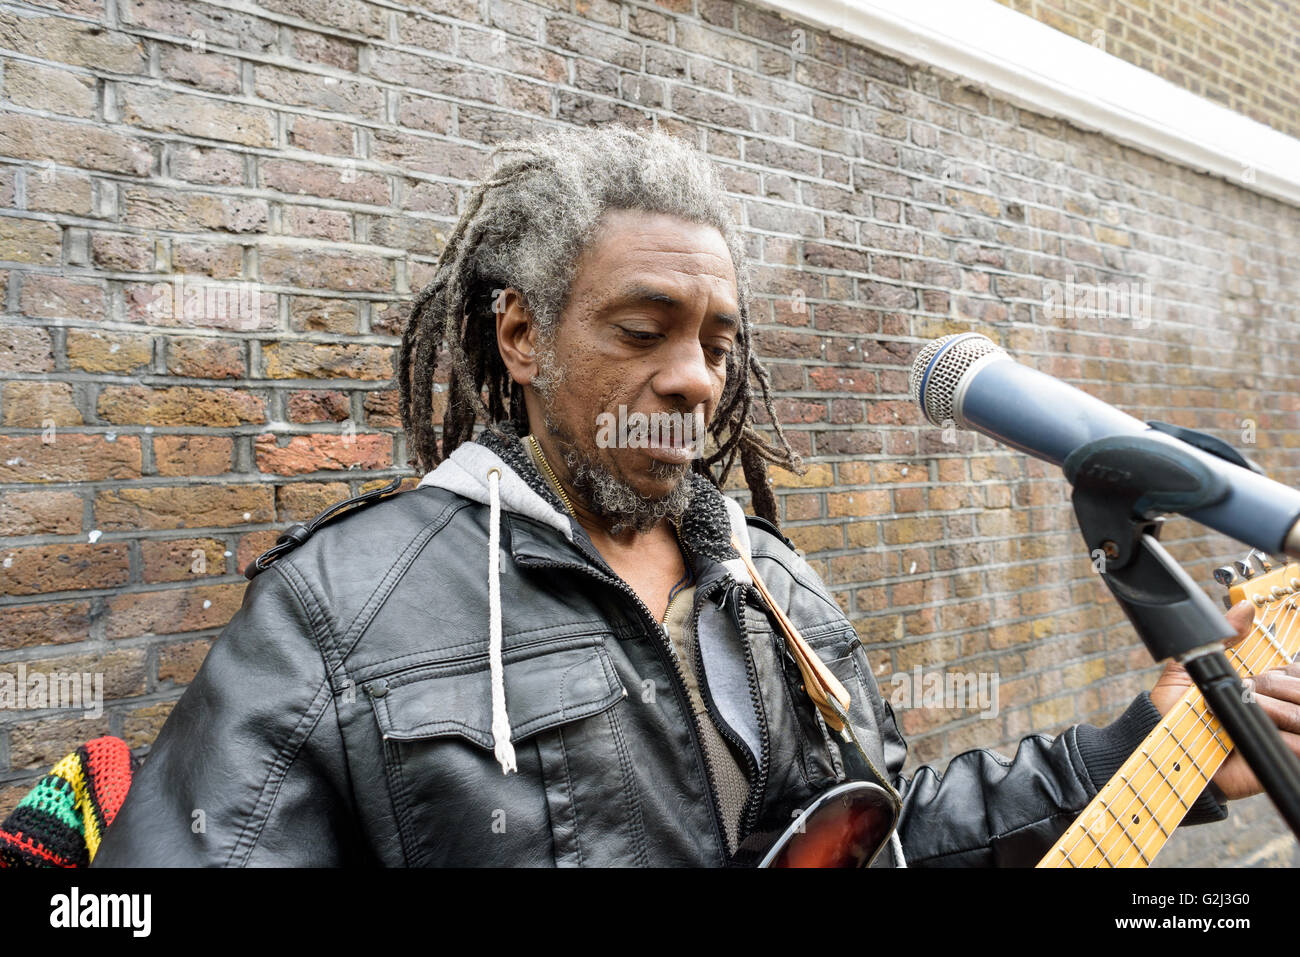 A street busker plays money with an electric guitar for donations on Brick Lane in London during the 1st of May Bank Holiday Stock Photo